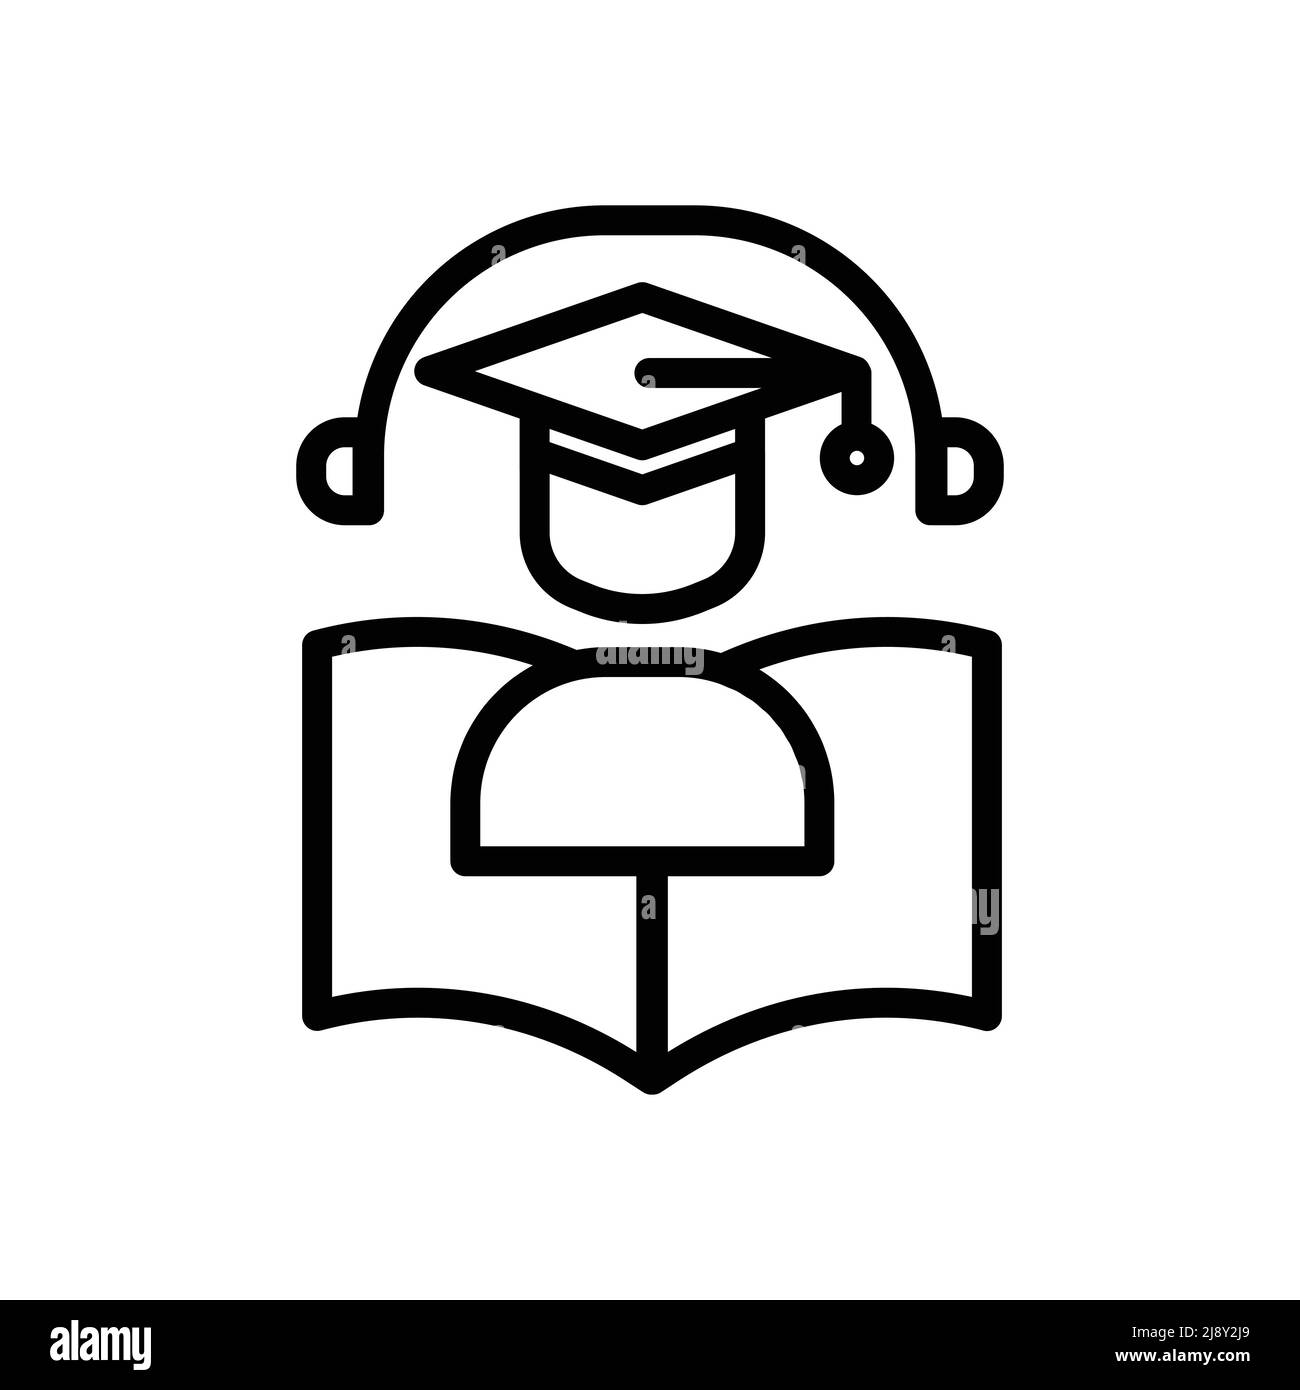 Online education icon vector. Virtual learning, student, book, headset. Line icon style. Simple design illustration editable Stock Vector